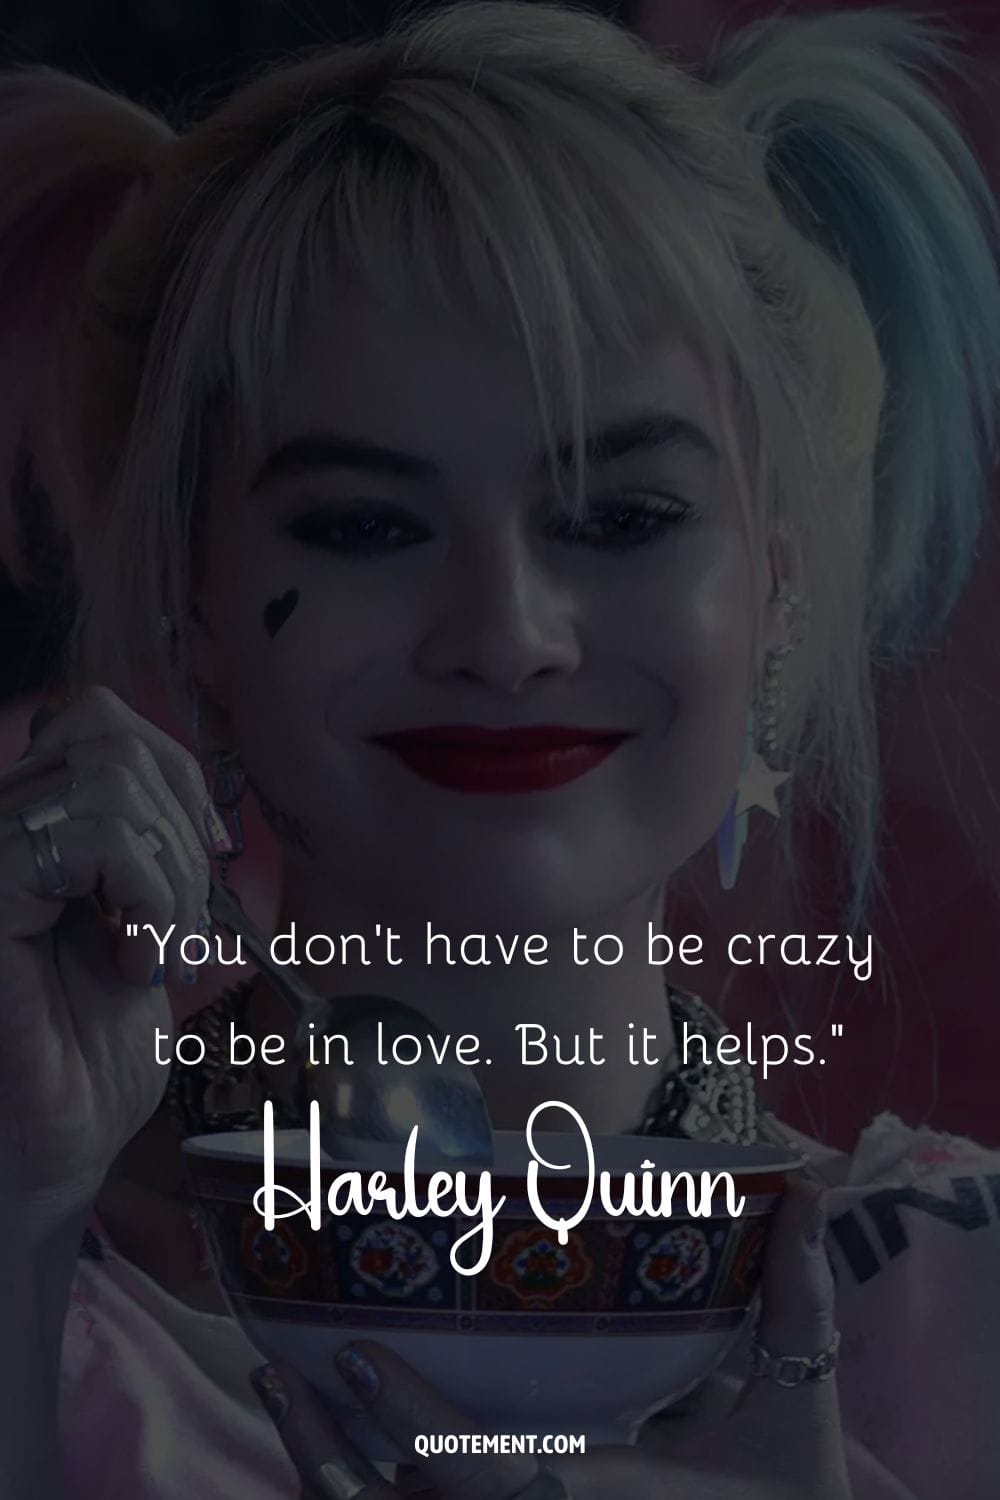 Unique charm of Harley Quinn.